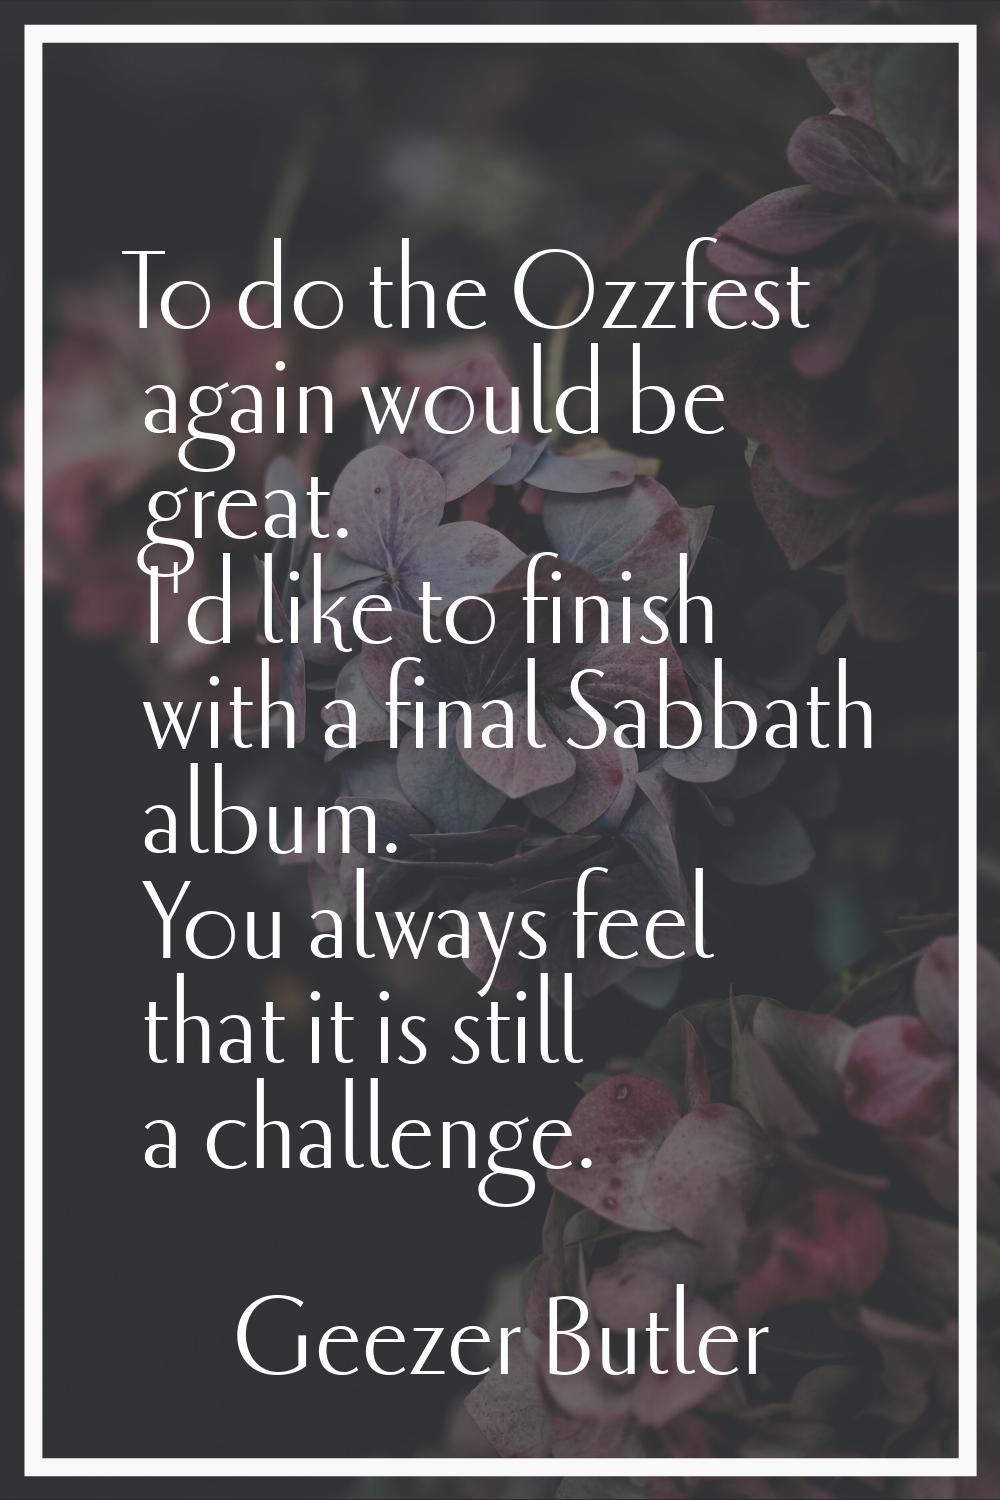 To do the Ozzfest again would be great. I'd like to finish with a final Sabbath album. You always f